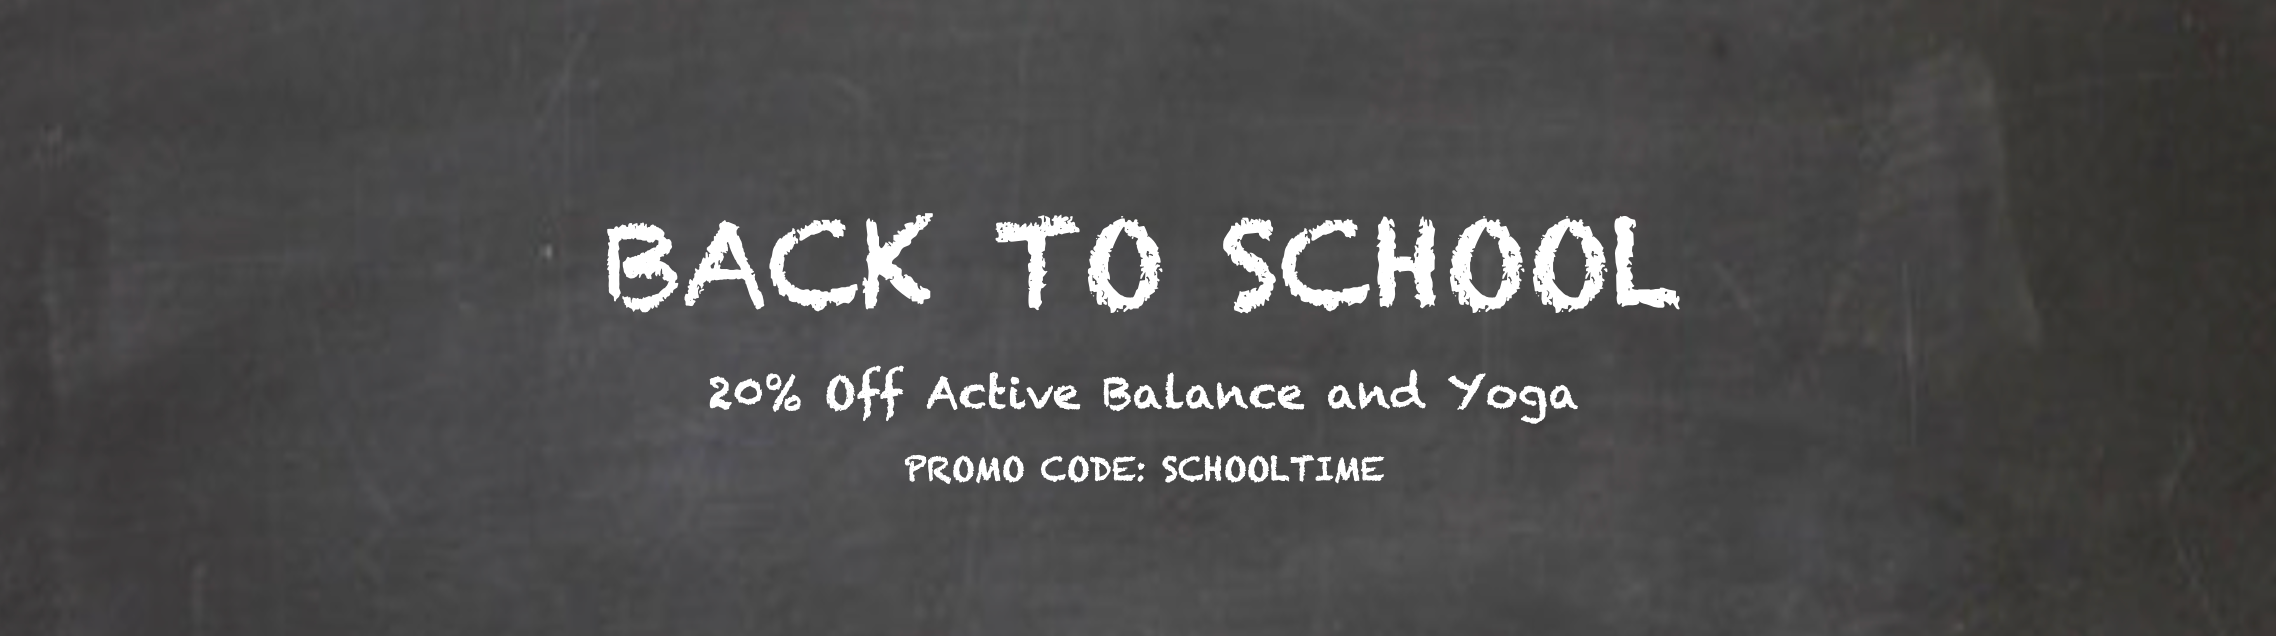 back to school - 20% off active balance and yoga